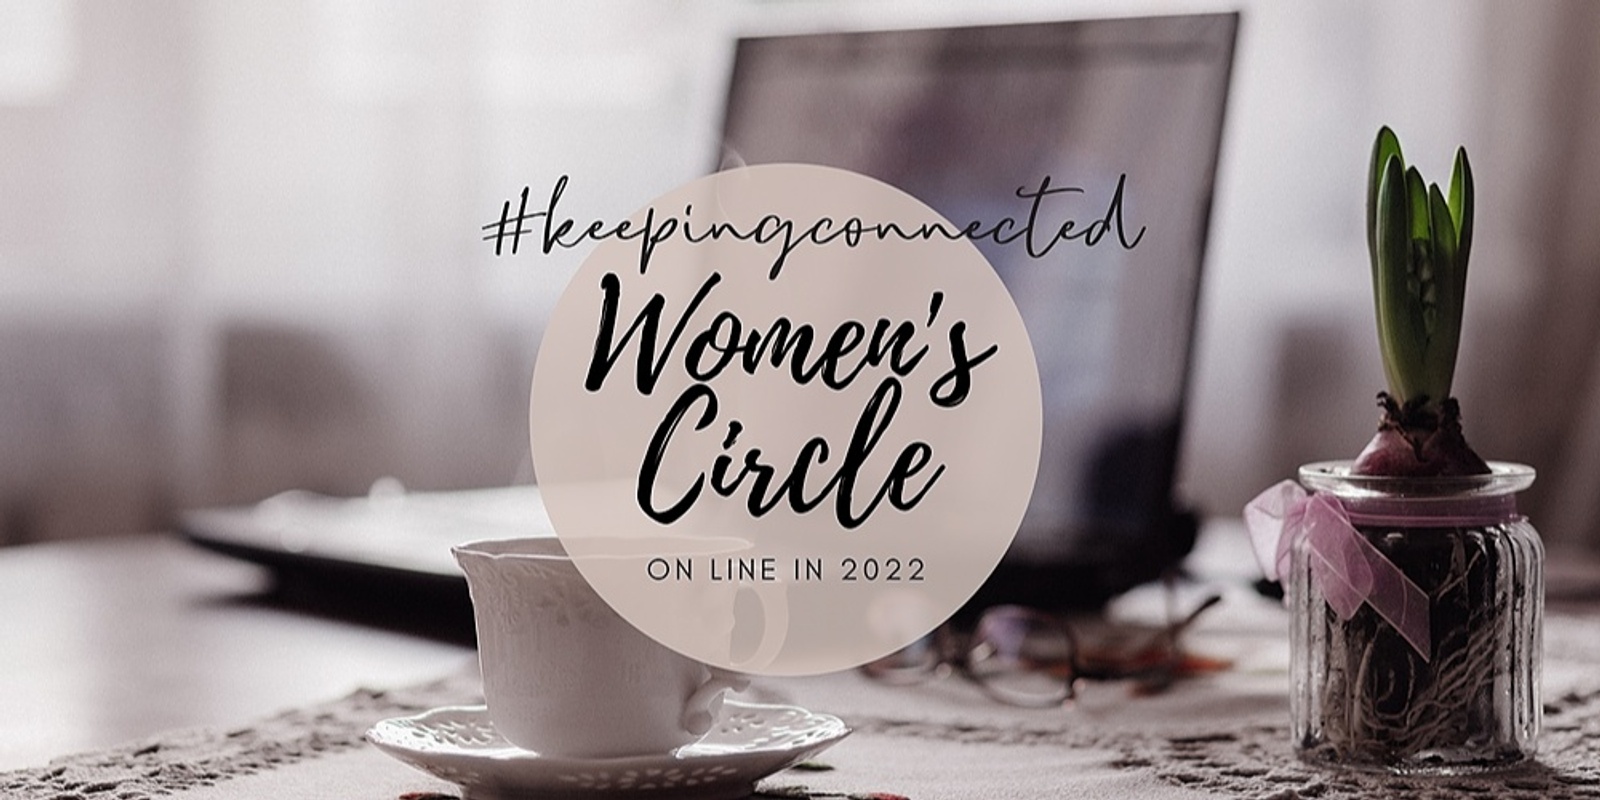 Banner image for #keepingconnected - an express women's circle on line